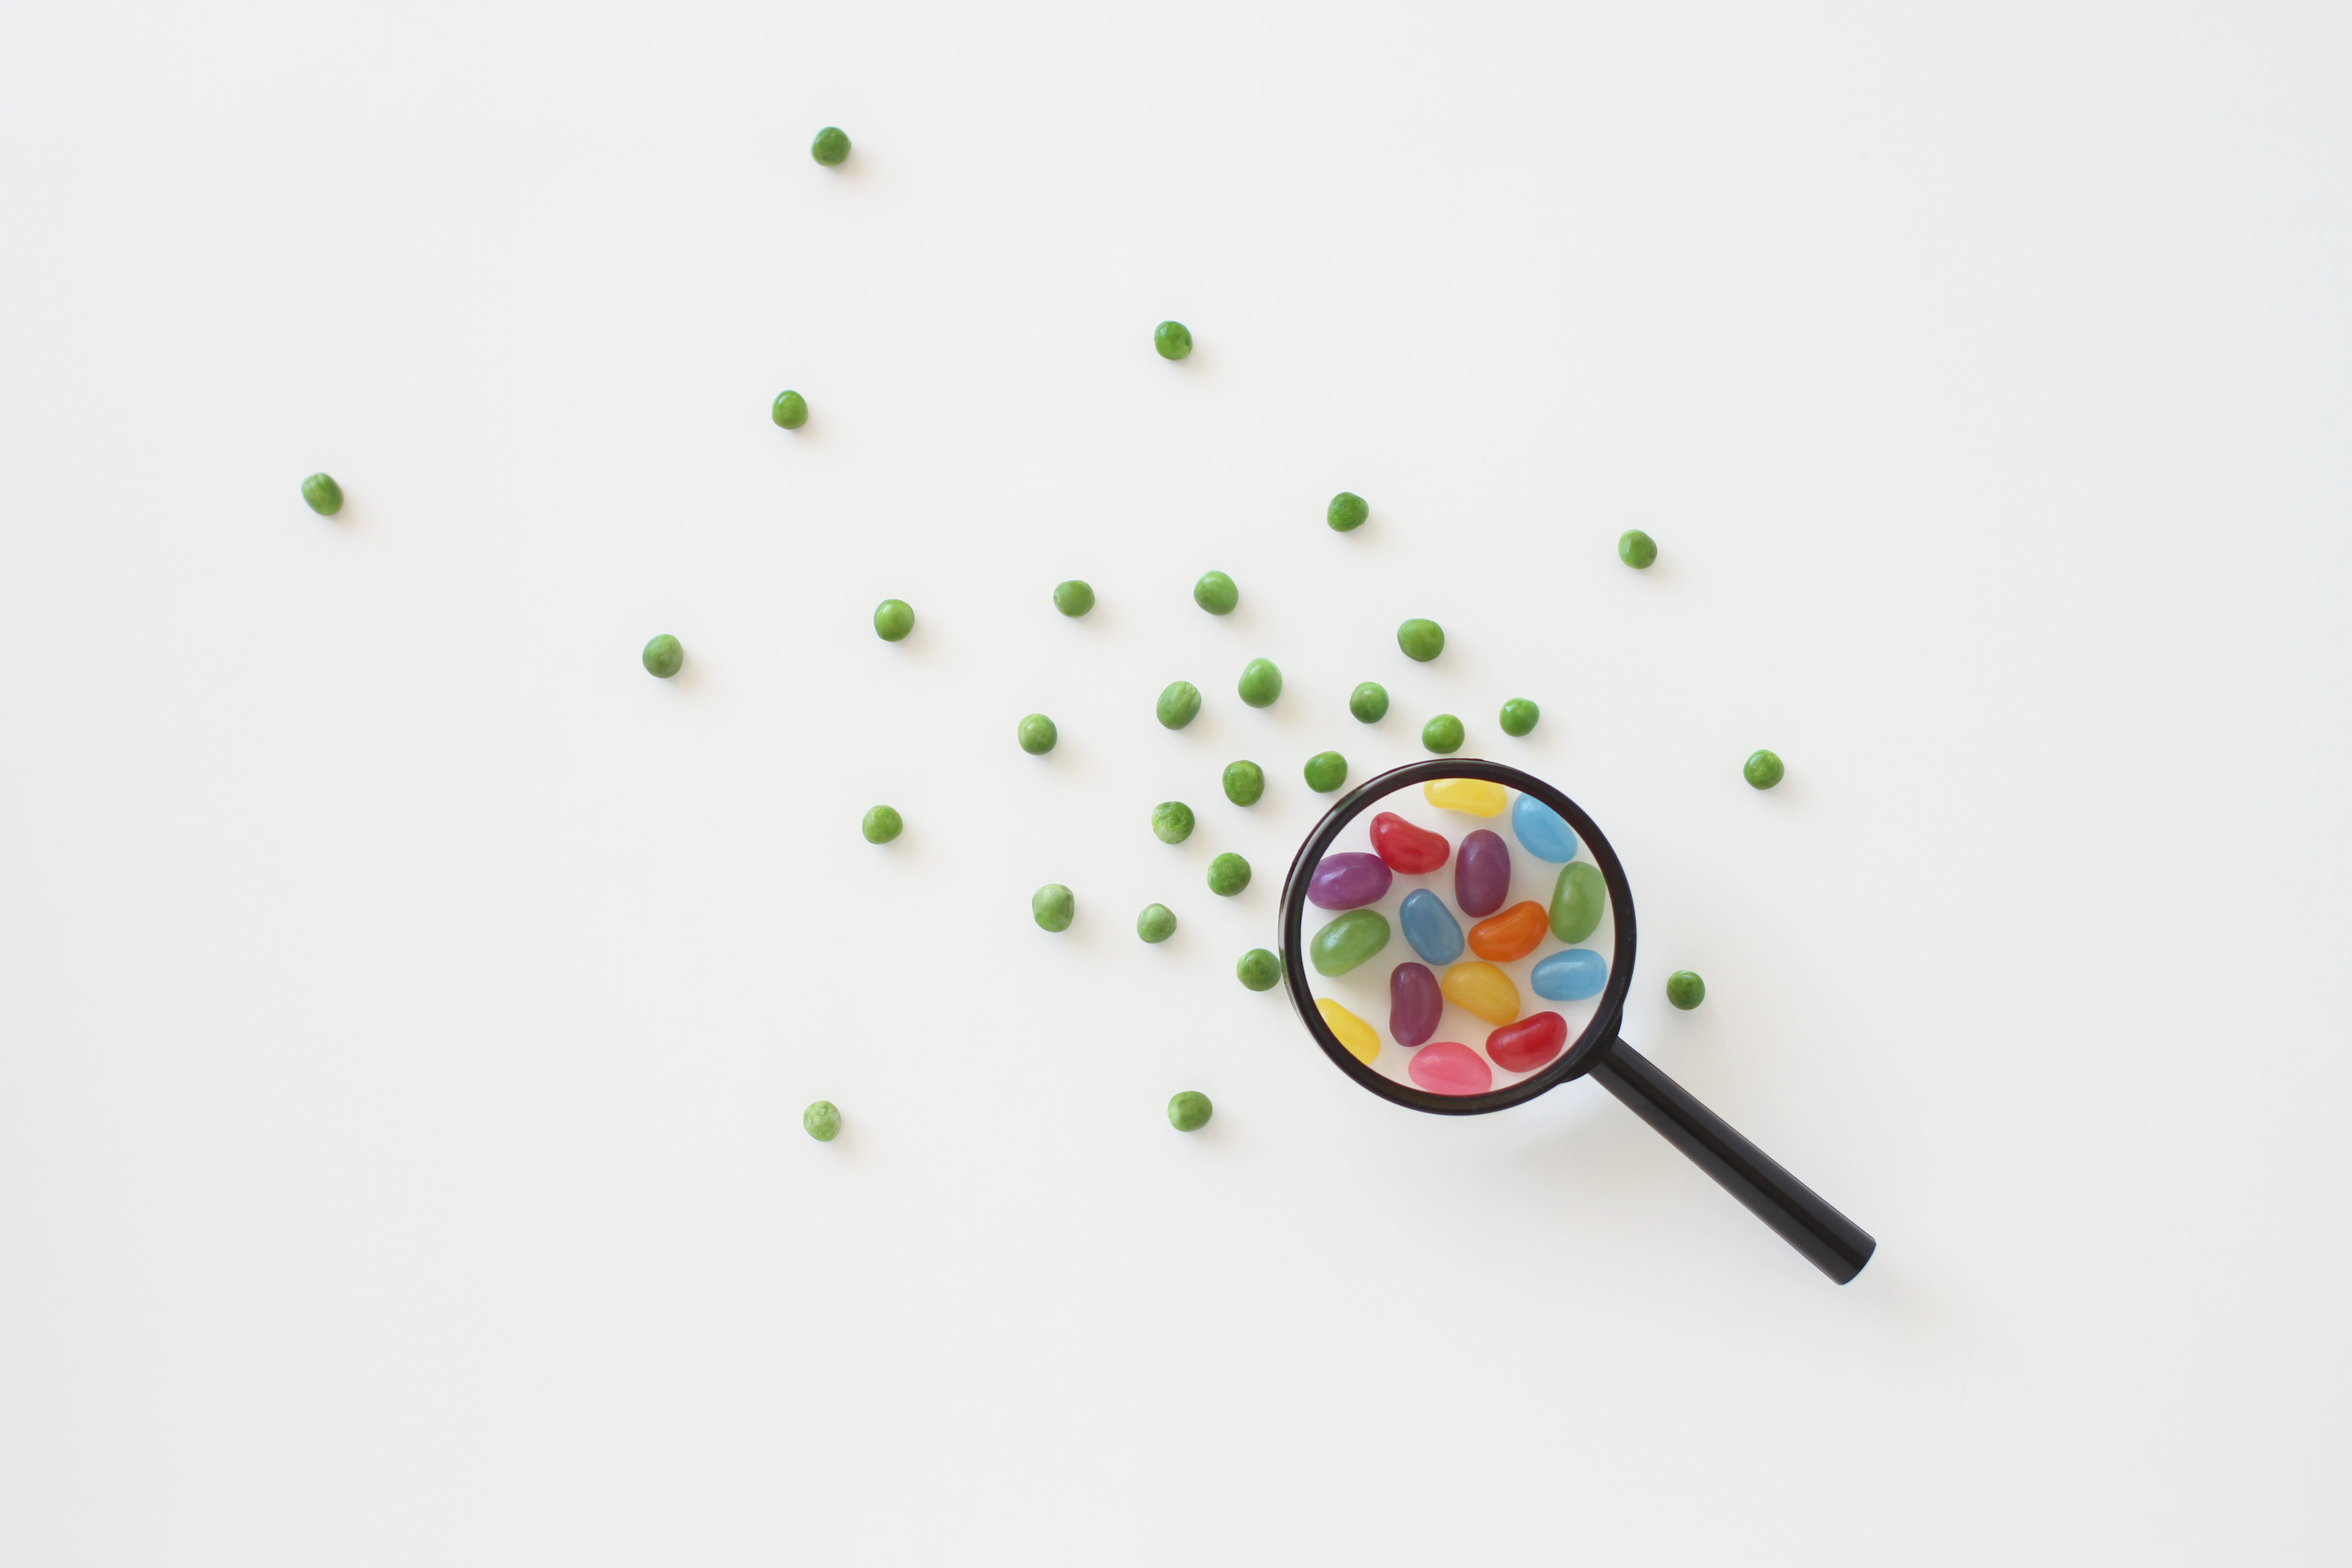 Image of jellybeans under a magnifying glass surrounded by peas to represent regulatory scrutiny.